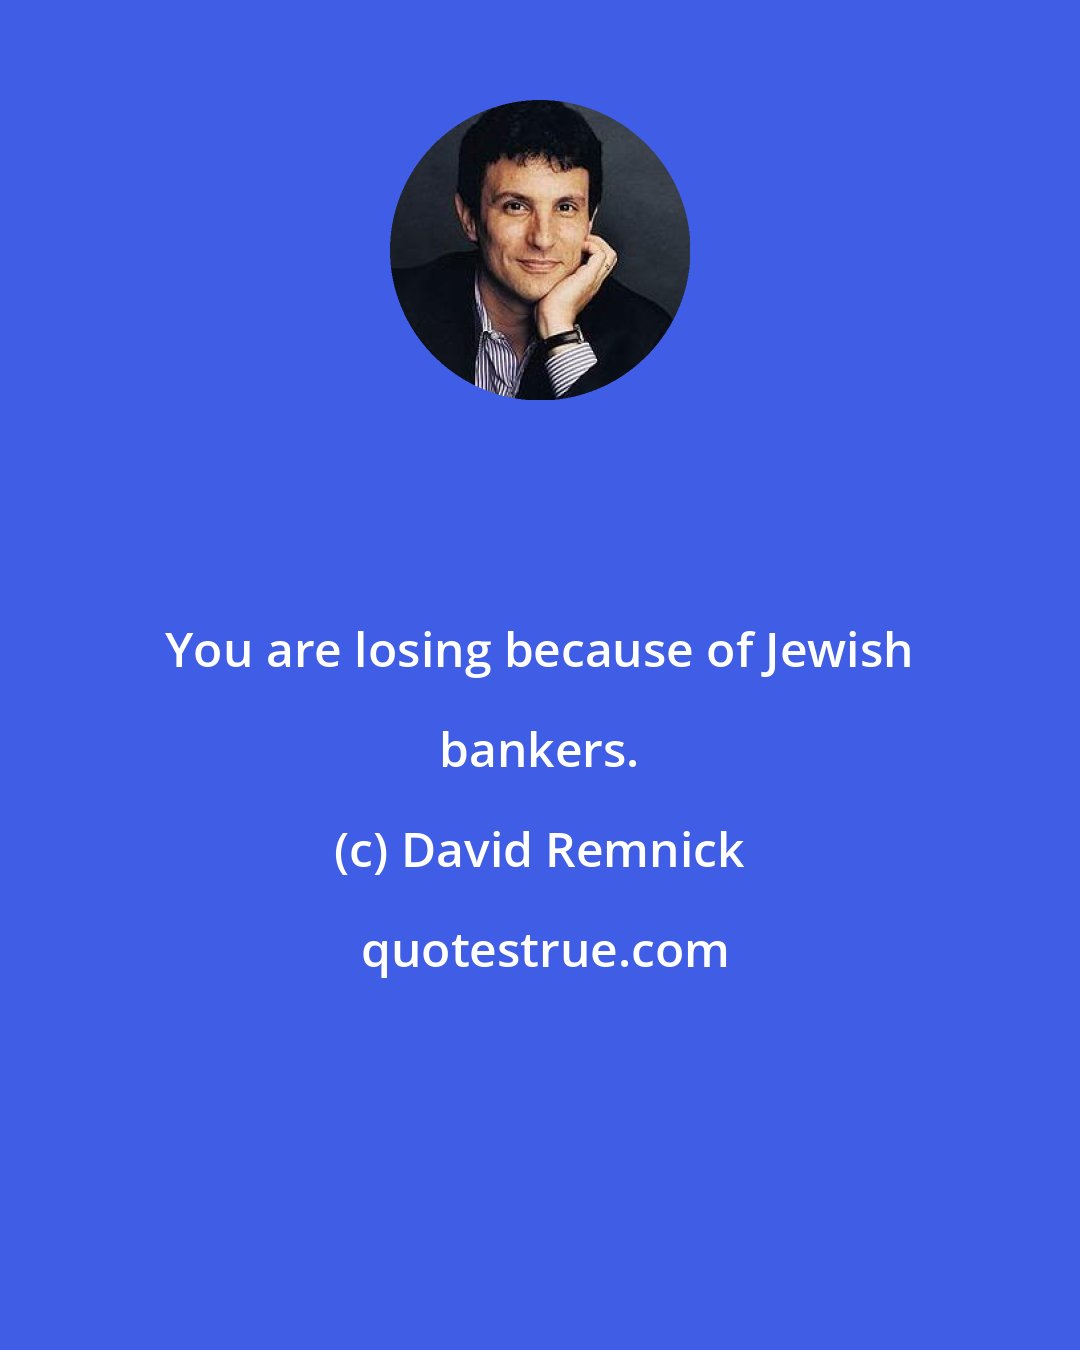 David Remnick: You are losing because of Jewish bankers.